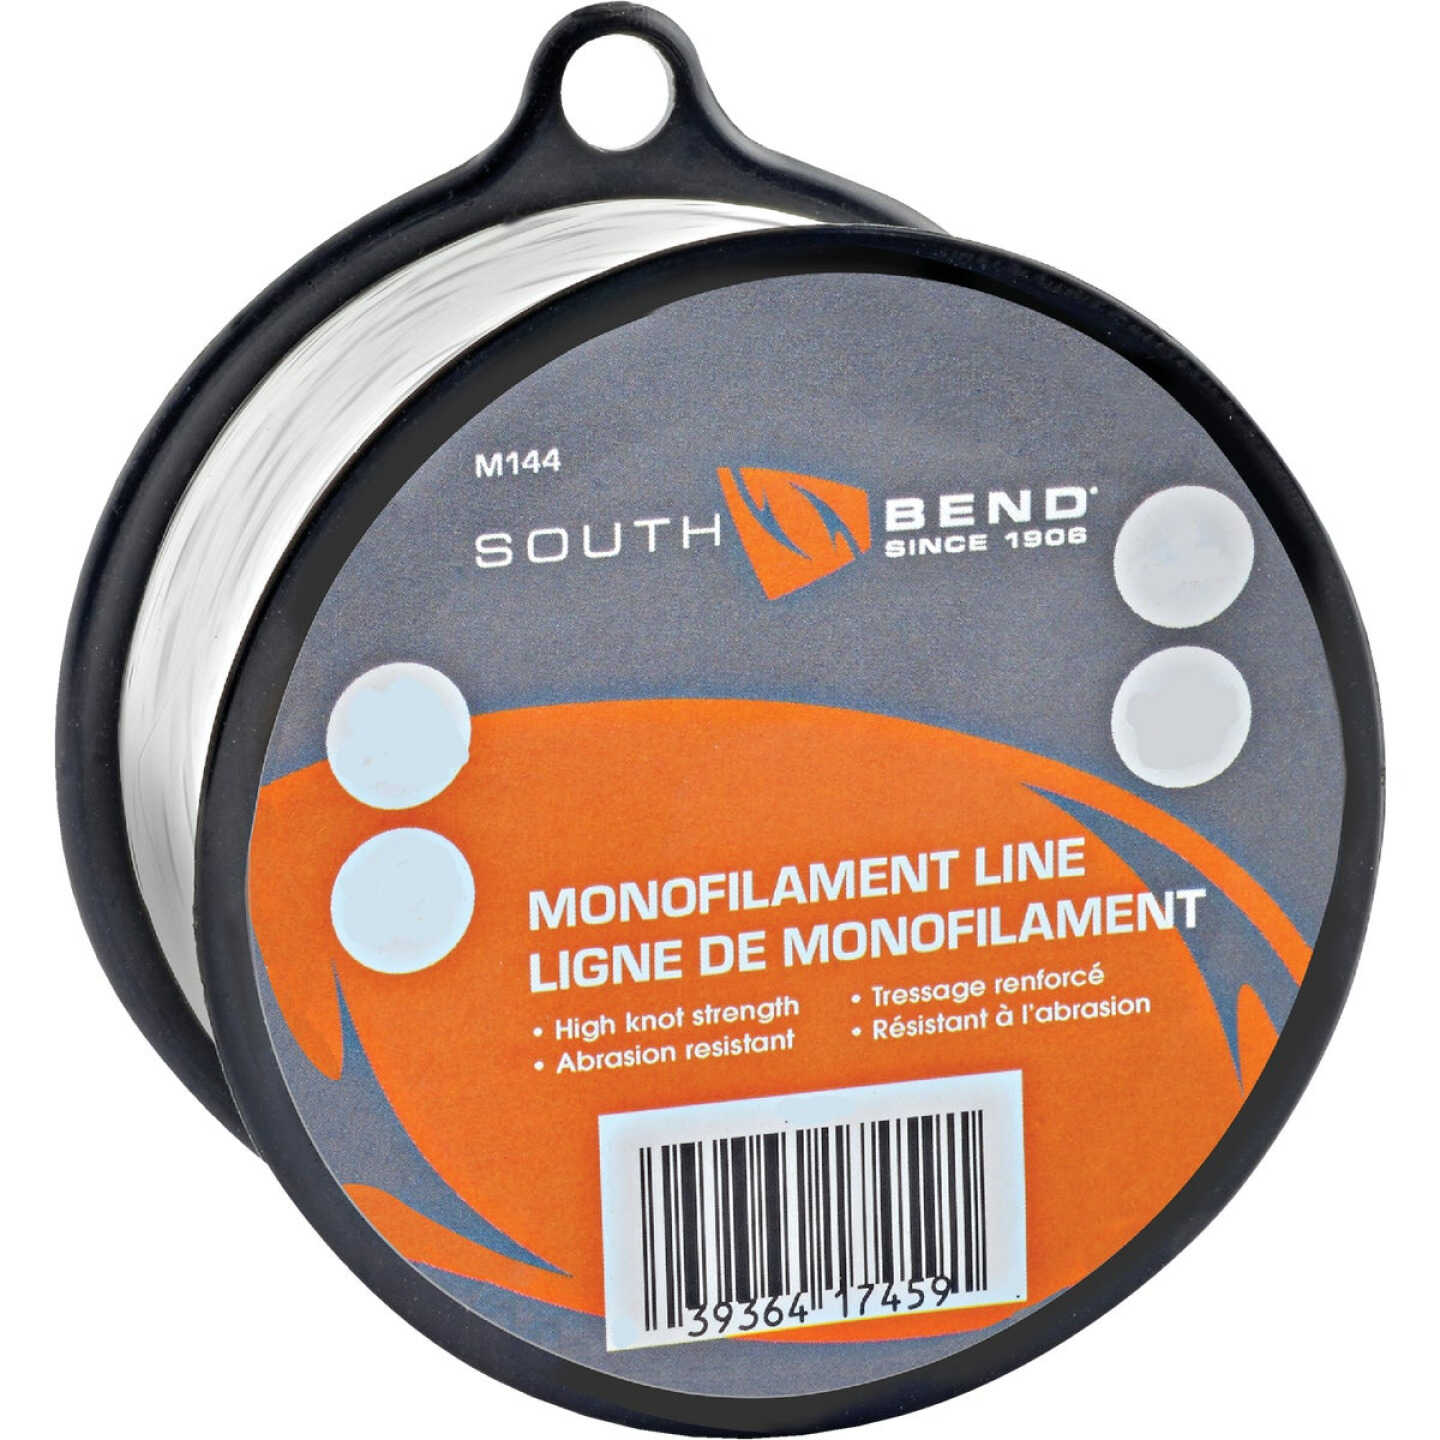 SouthBend 8 Lb. 765 Yd. Clear Monofilament Fishing Line - Zettler Hardware